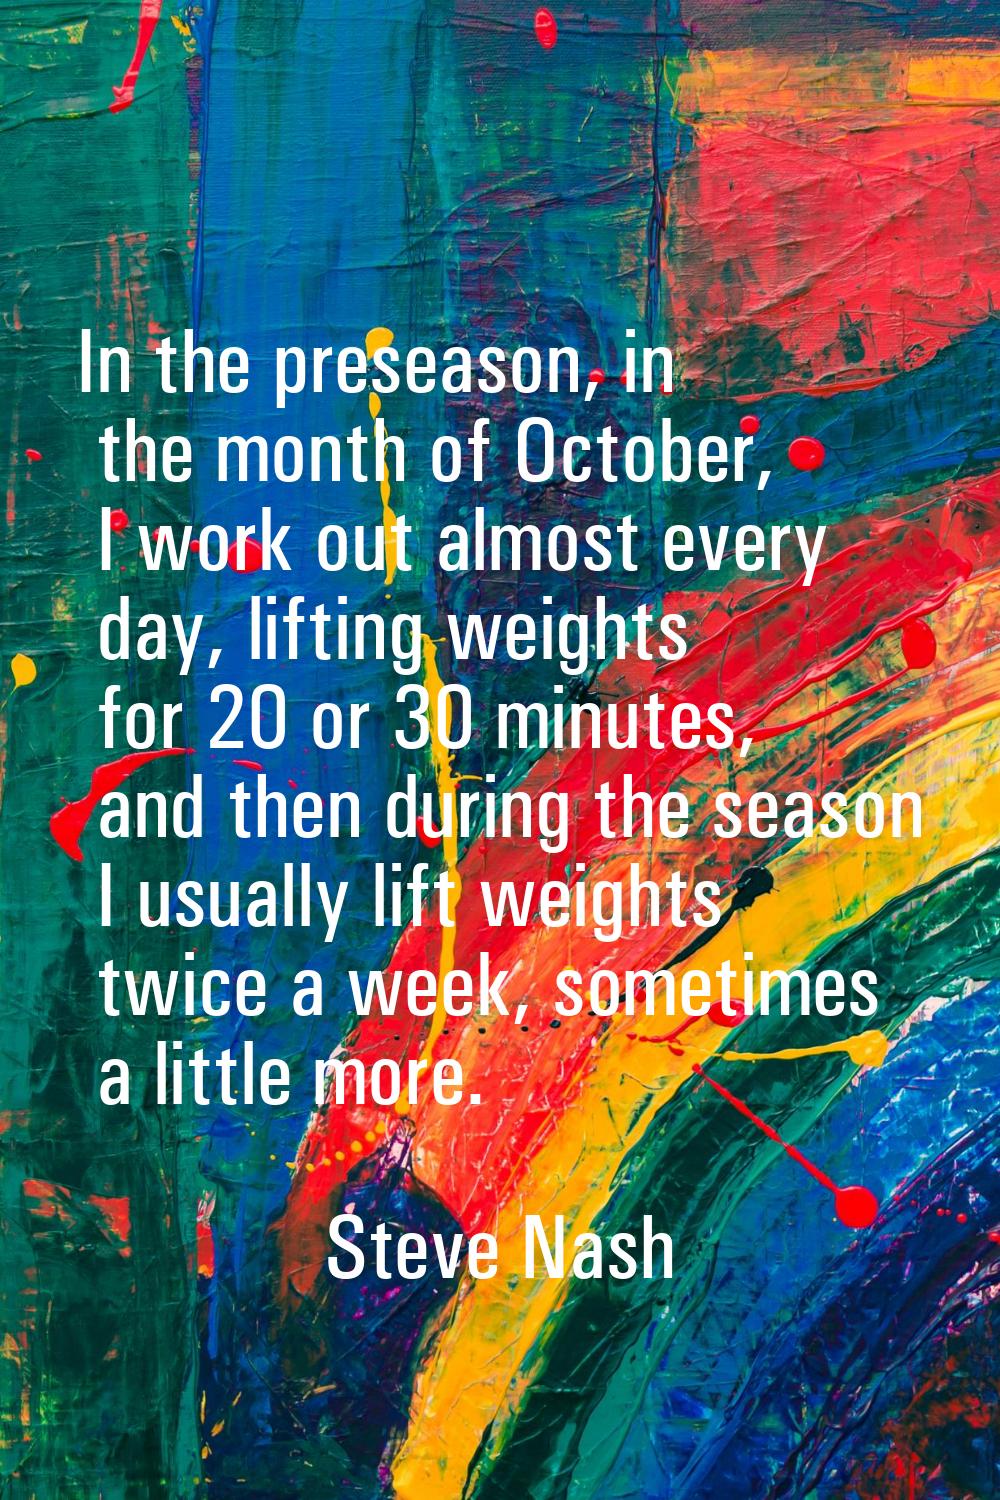 In the preseason, in the month of October, I work out almost every day, lifting weights for 20 or 3